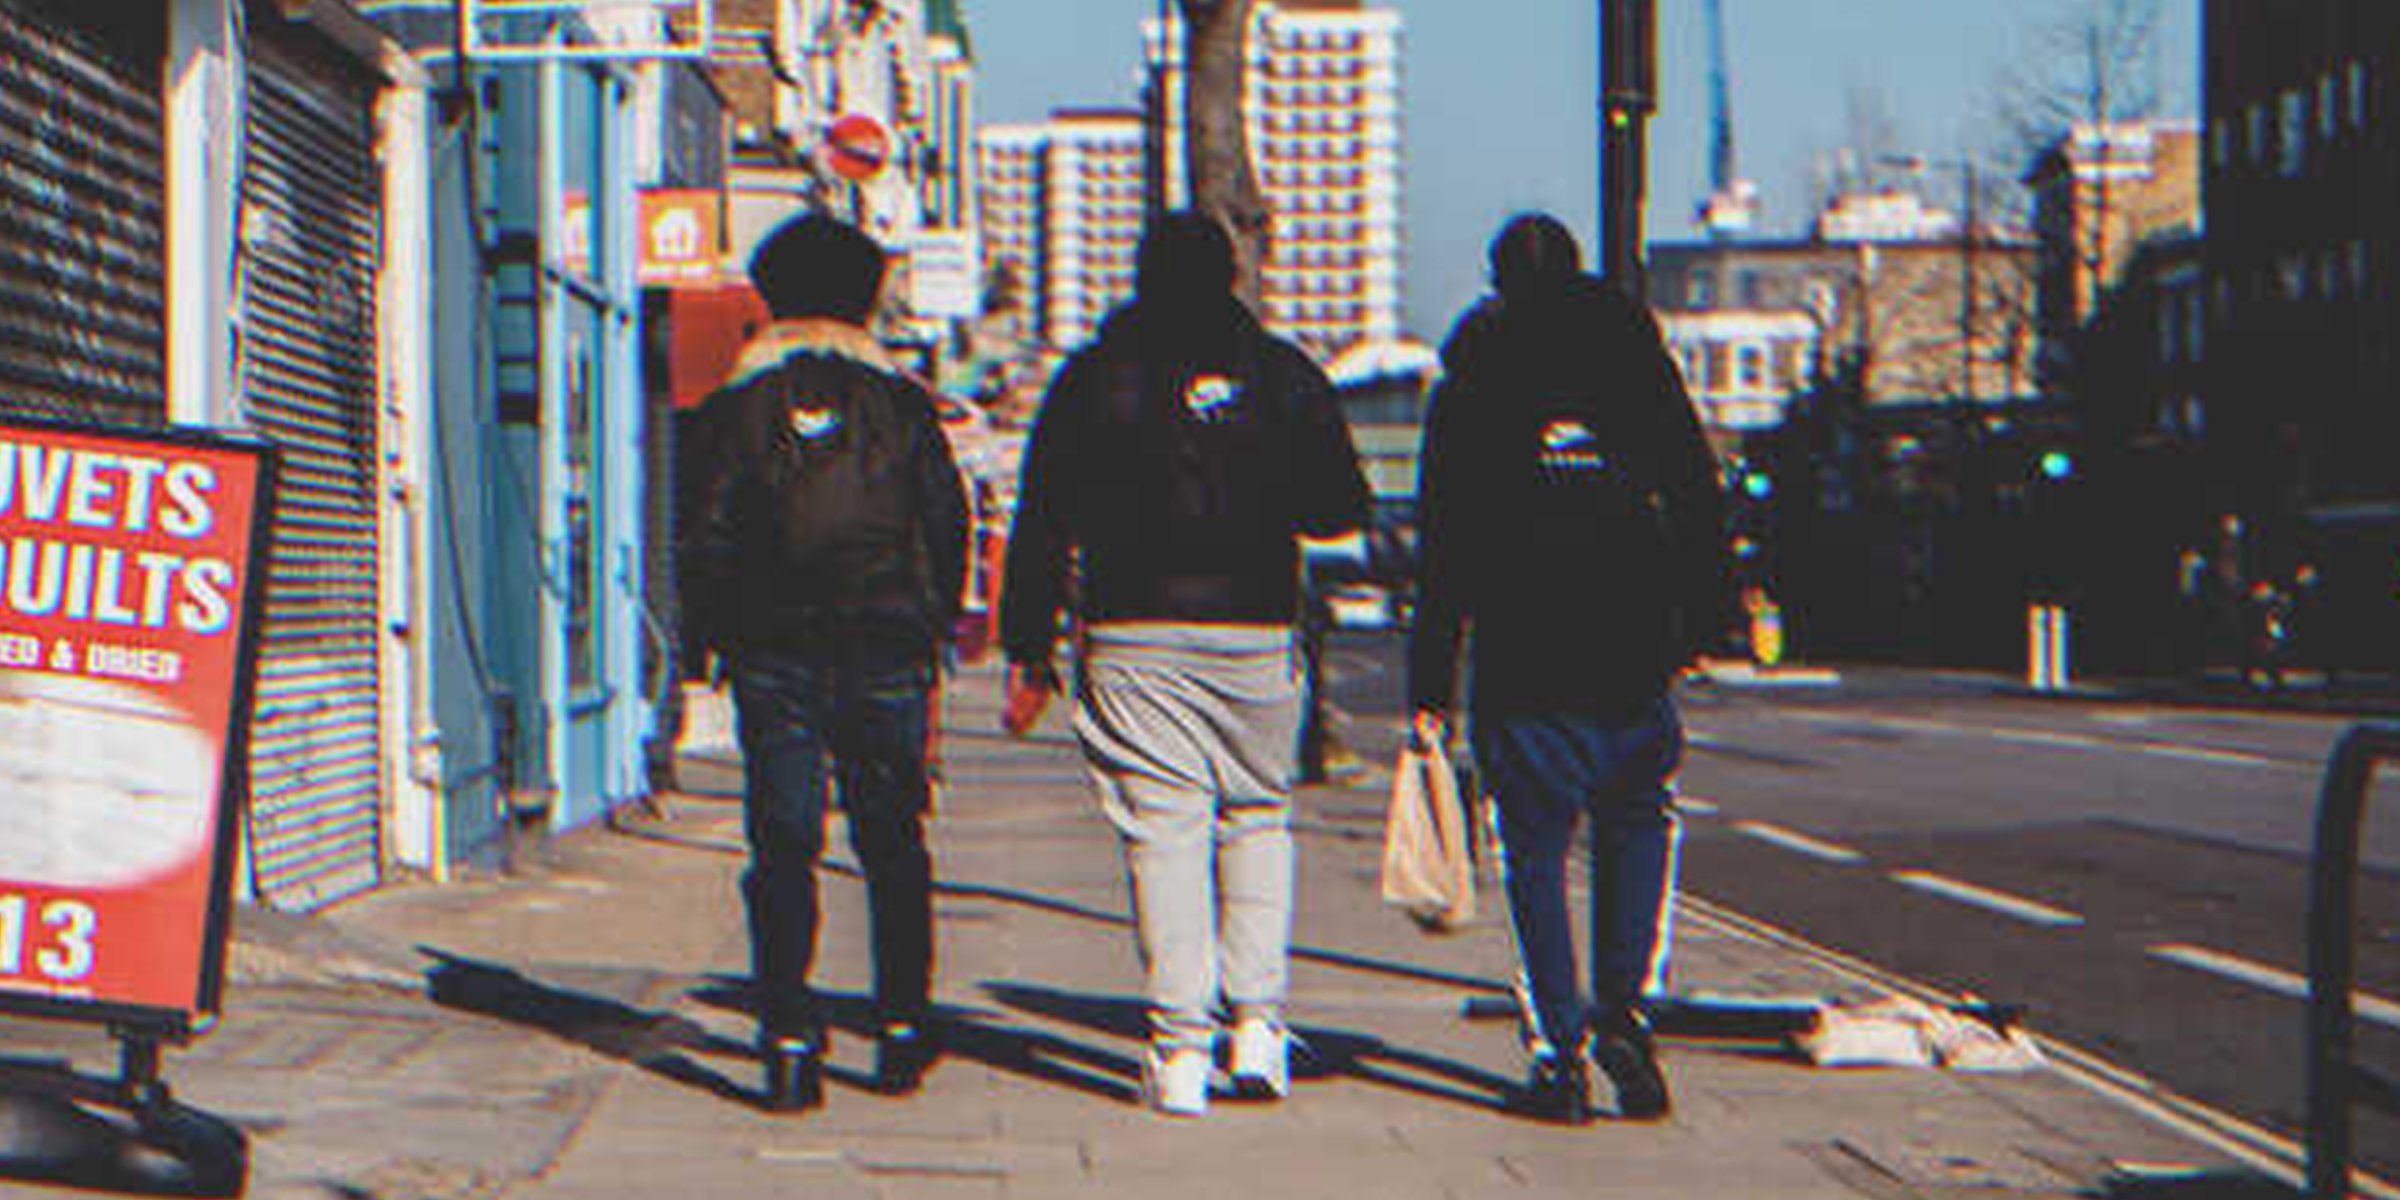 Three young guys walking down the street | Source: Shutterstock